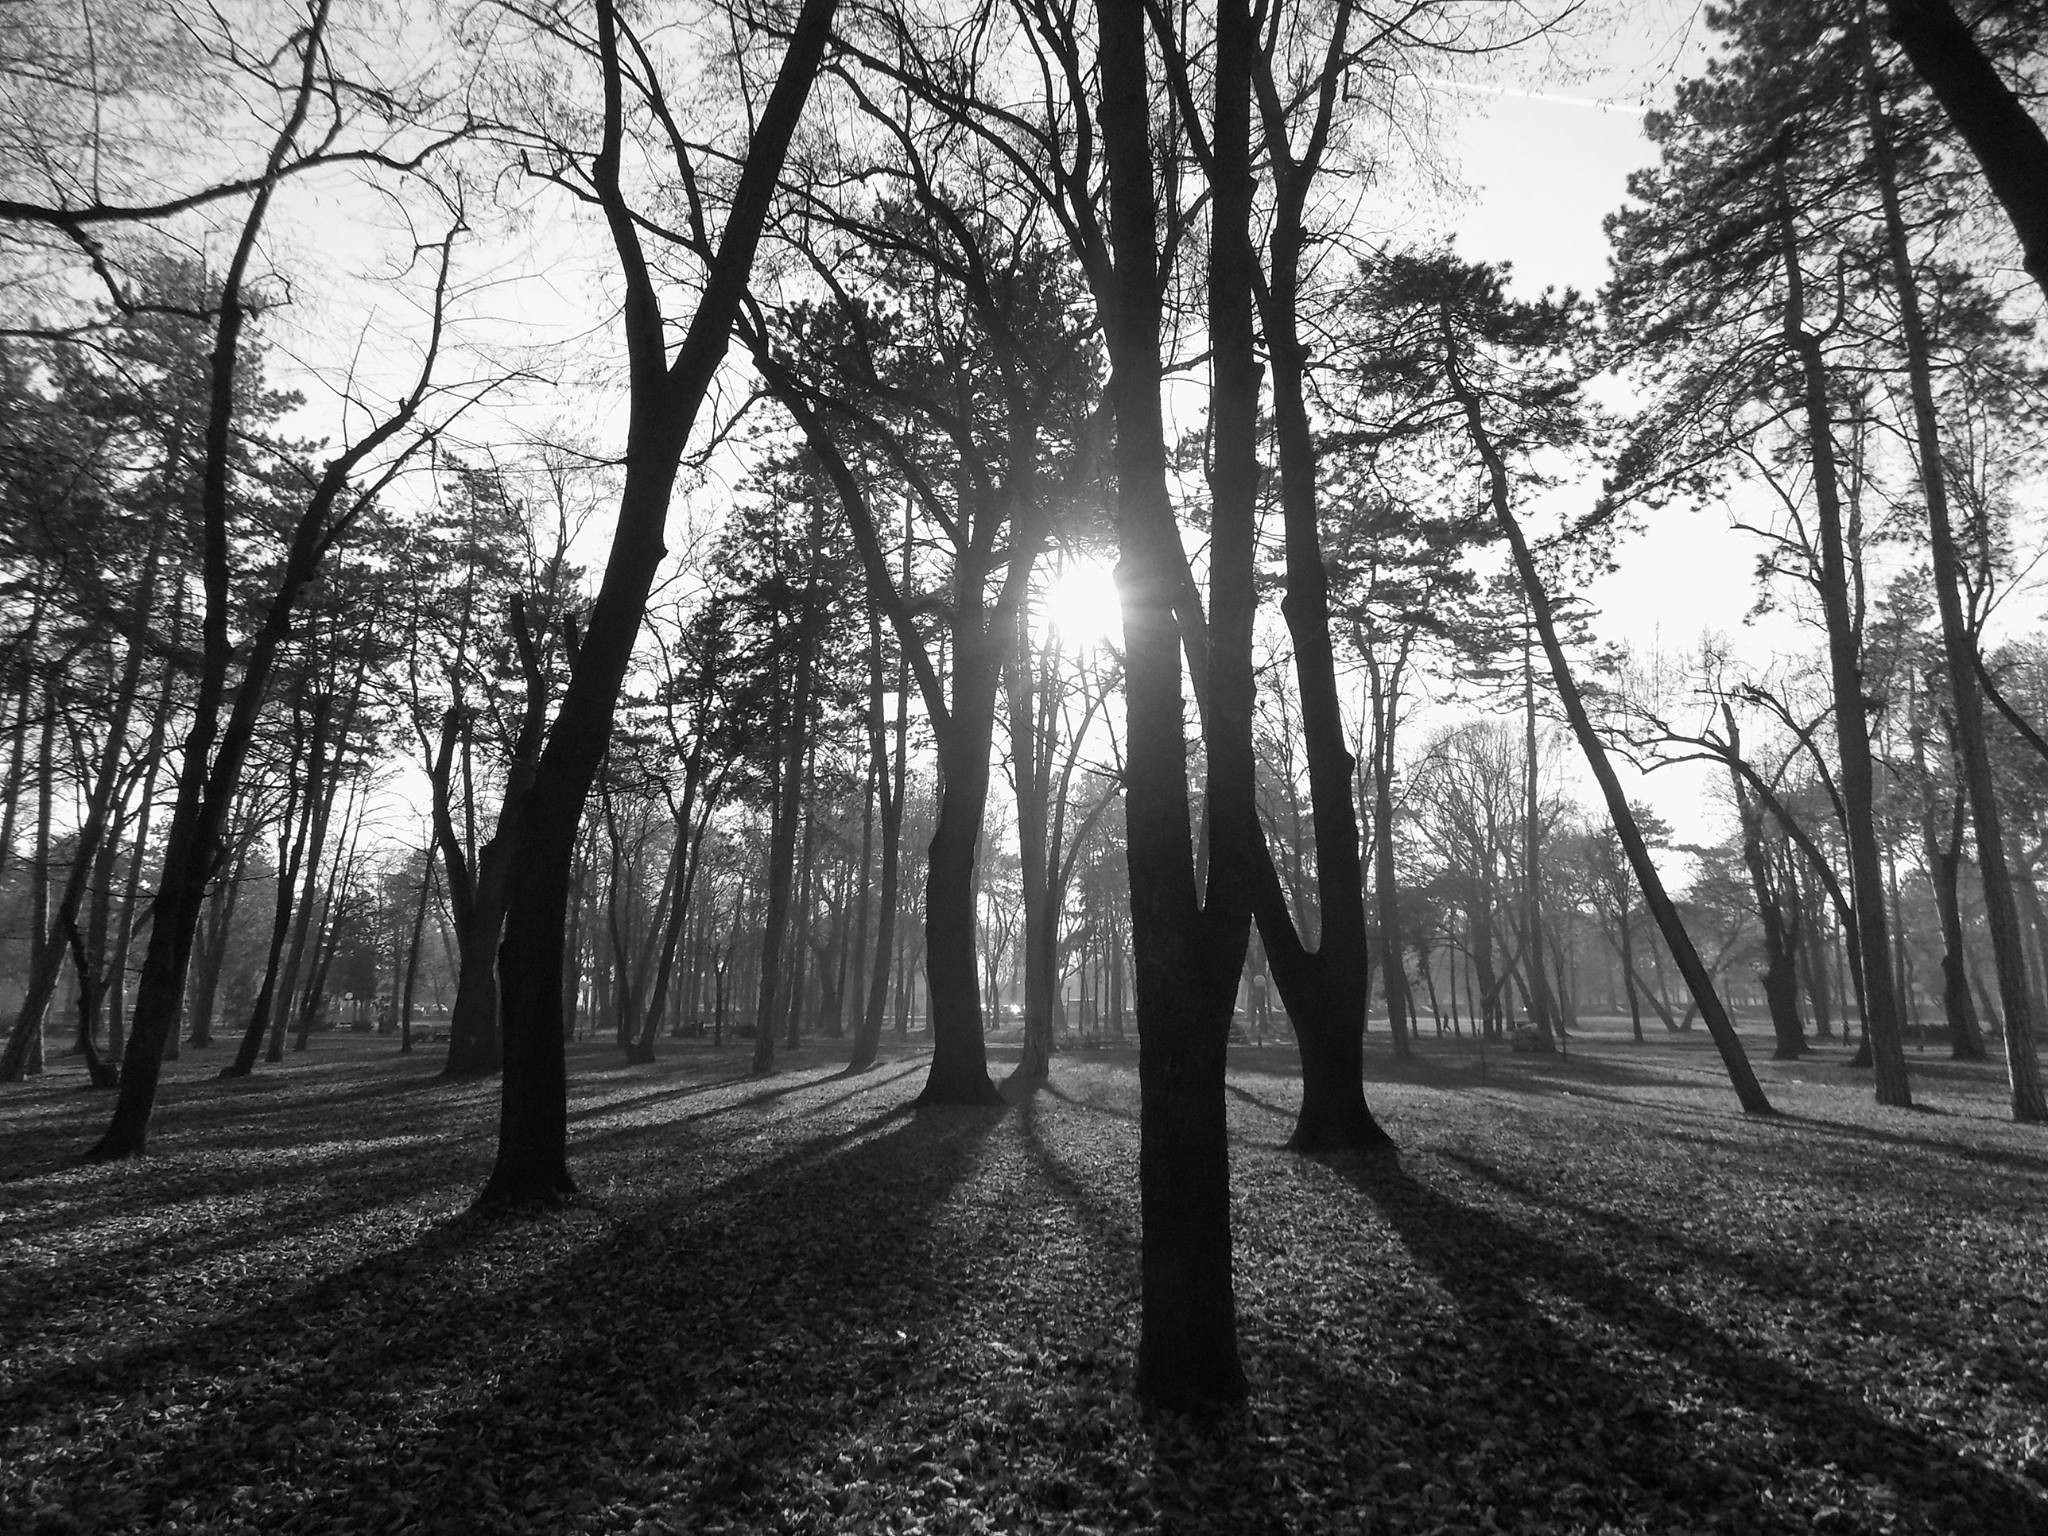 General 2048x1536 monochrome park nature Serbia outdoors sunlight trees